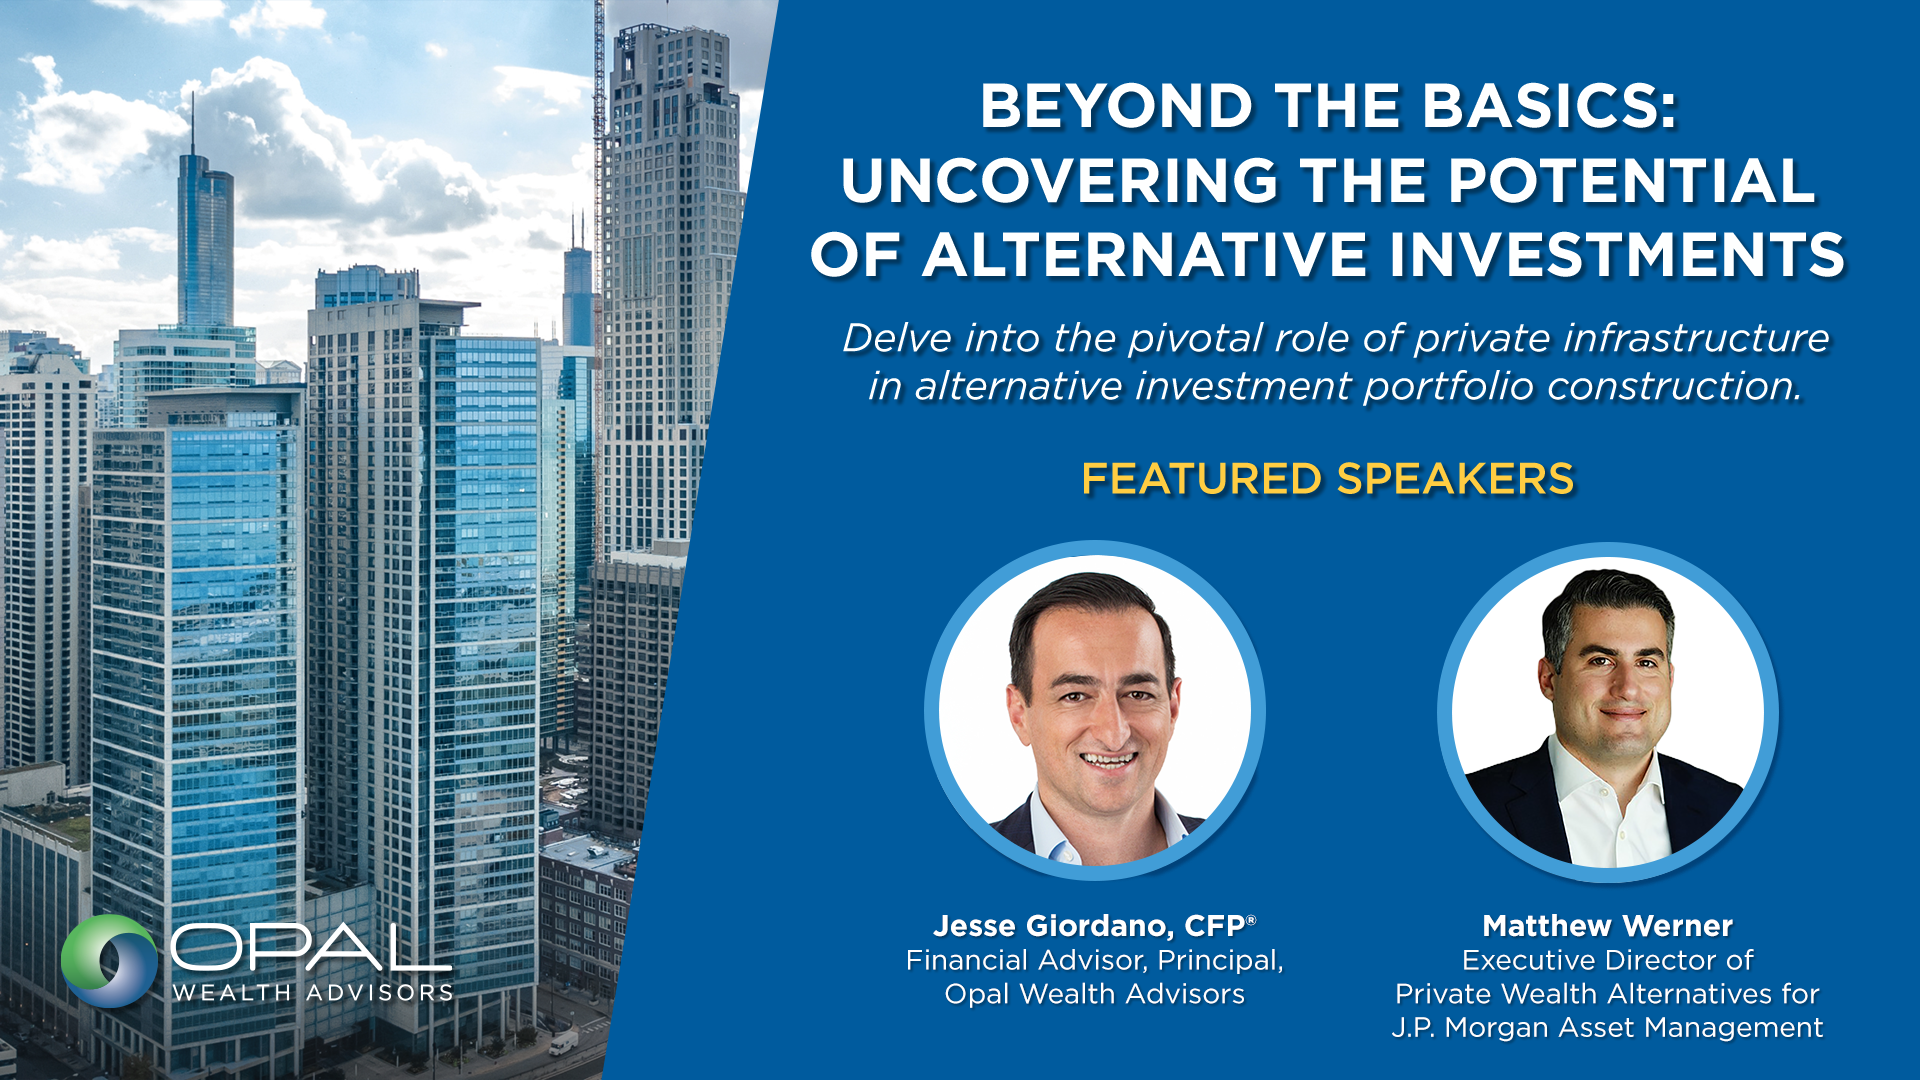 Invitation by Opal Wealth Advisors for an event on alternative investments featuring speakers Jesse Giordano and Matthew Werner, on April 30, from 5:30-7:30 PM.